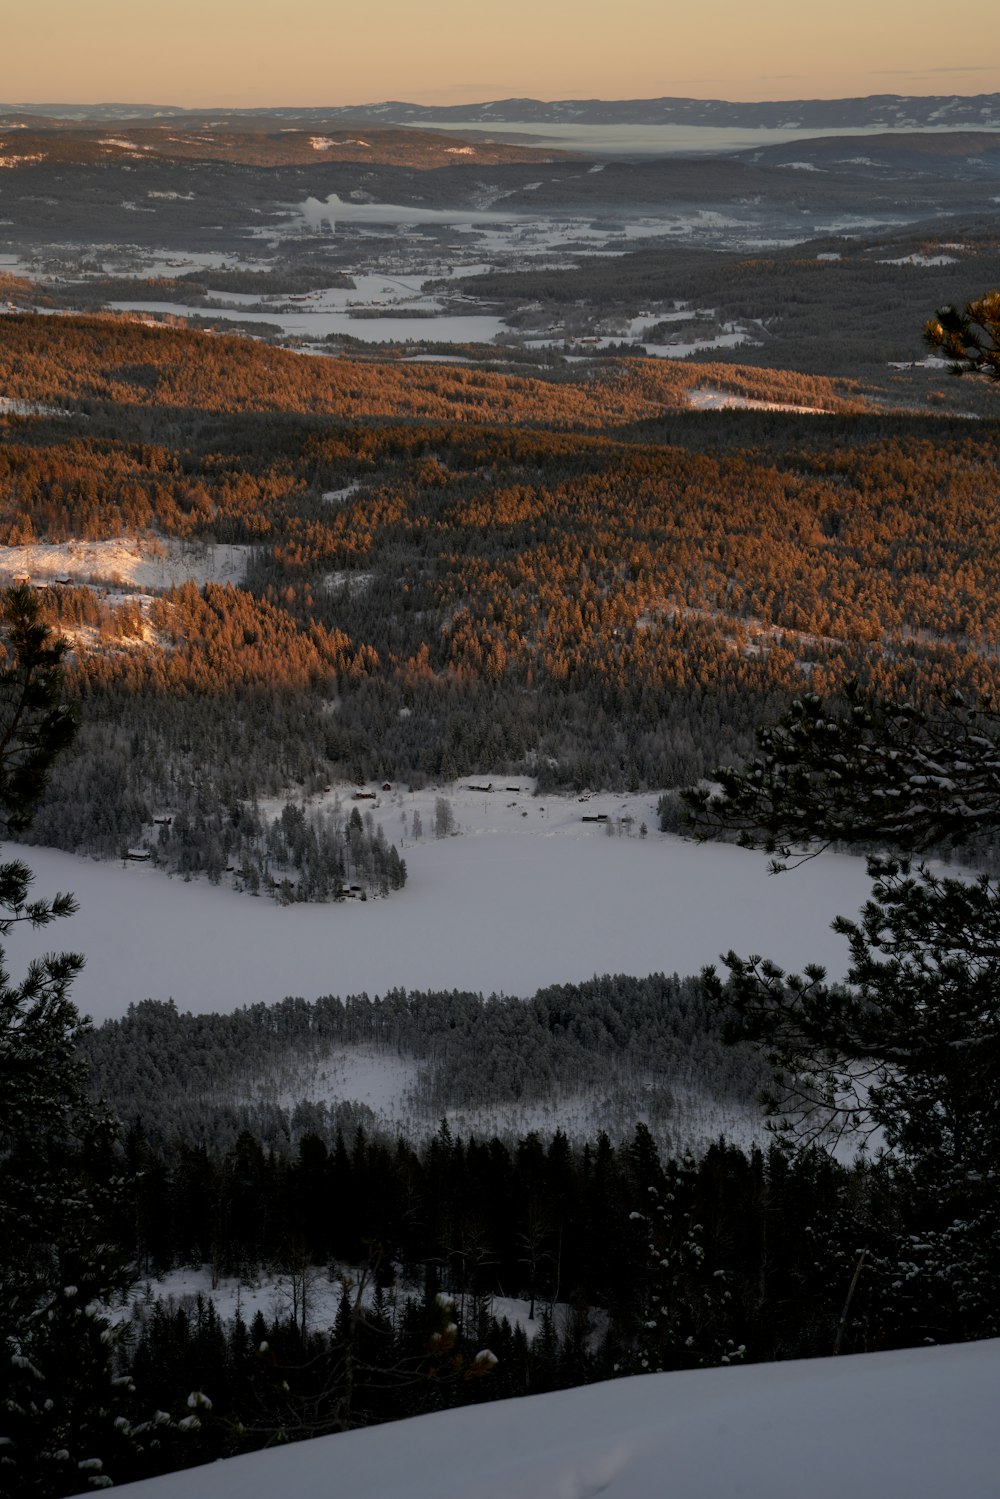 a view of a snow covered mountain with trees in the foreground